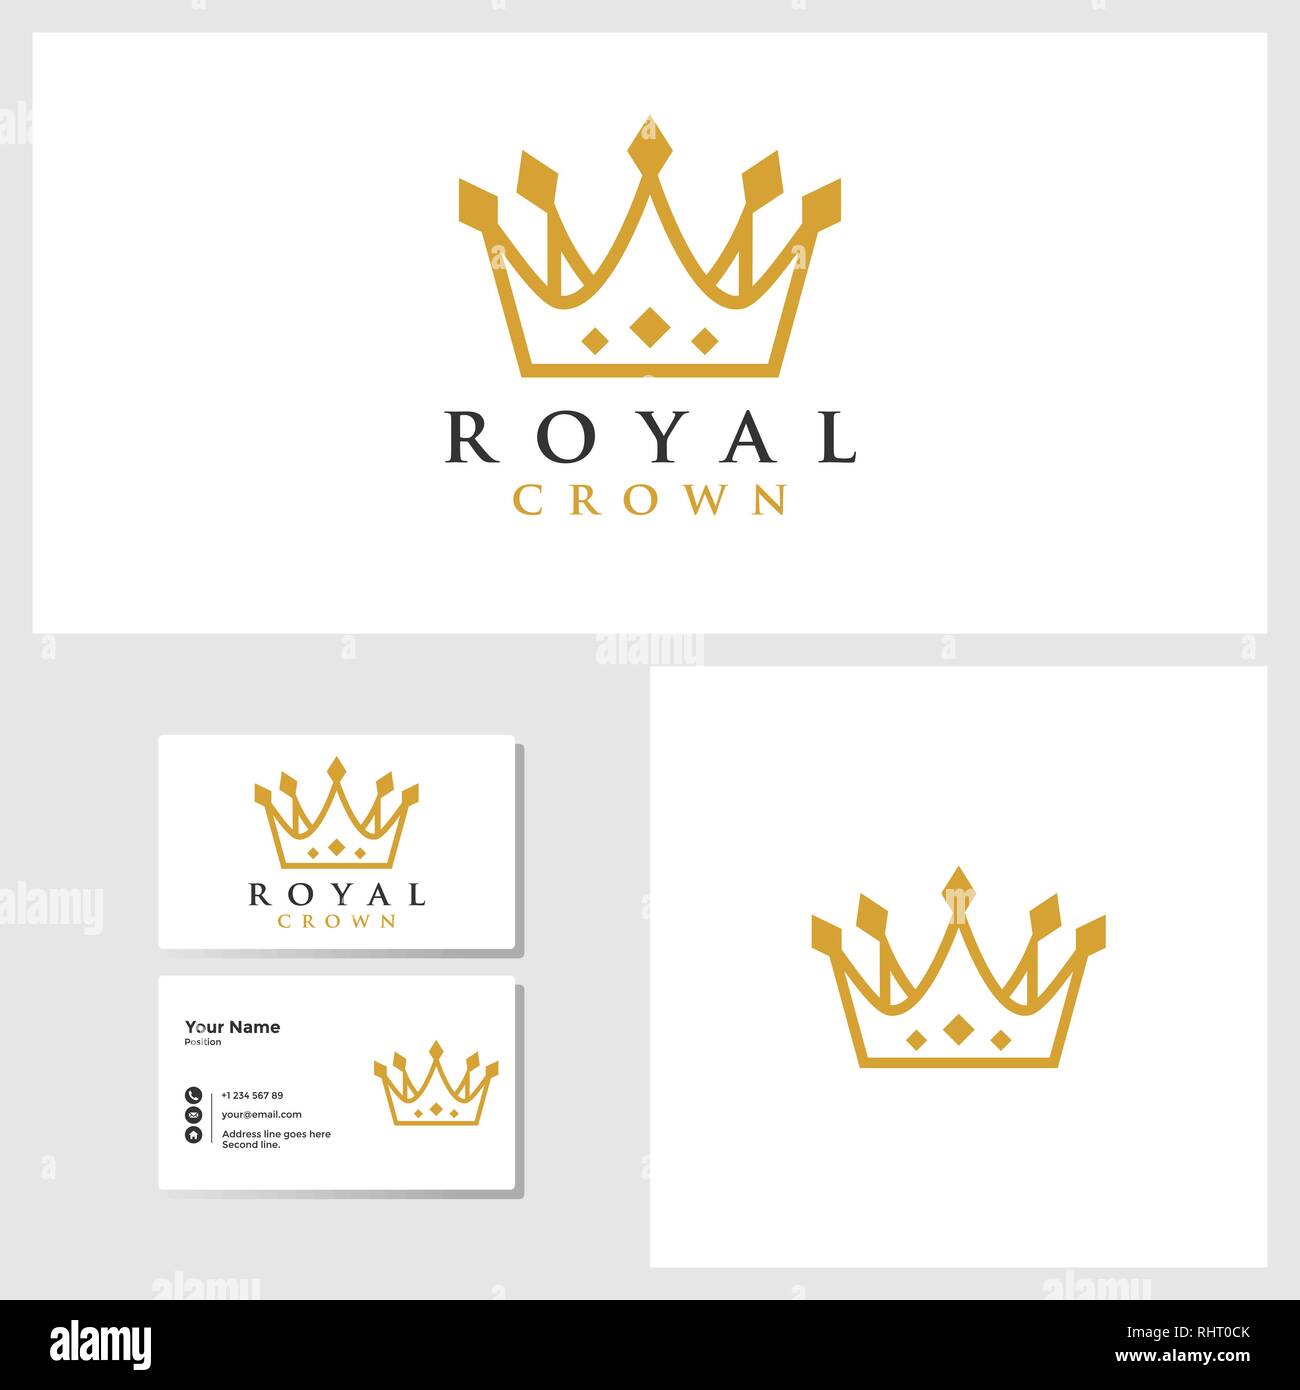 Royal crown logo template with business card design mockup vector Stock Vector